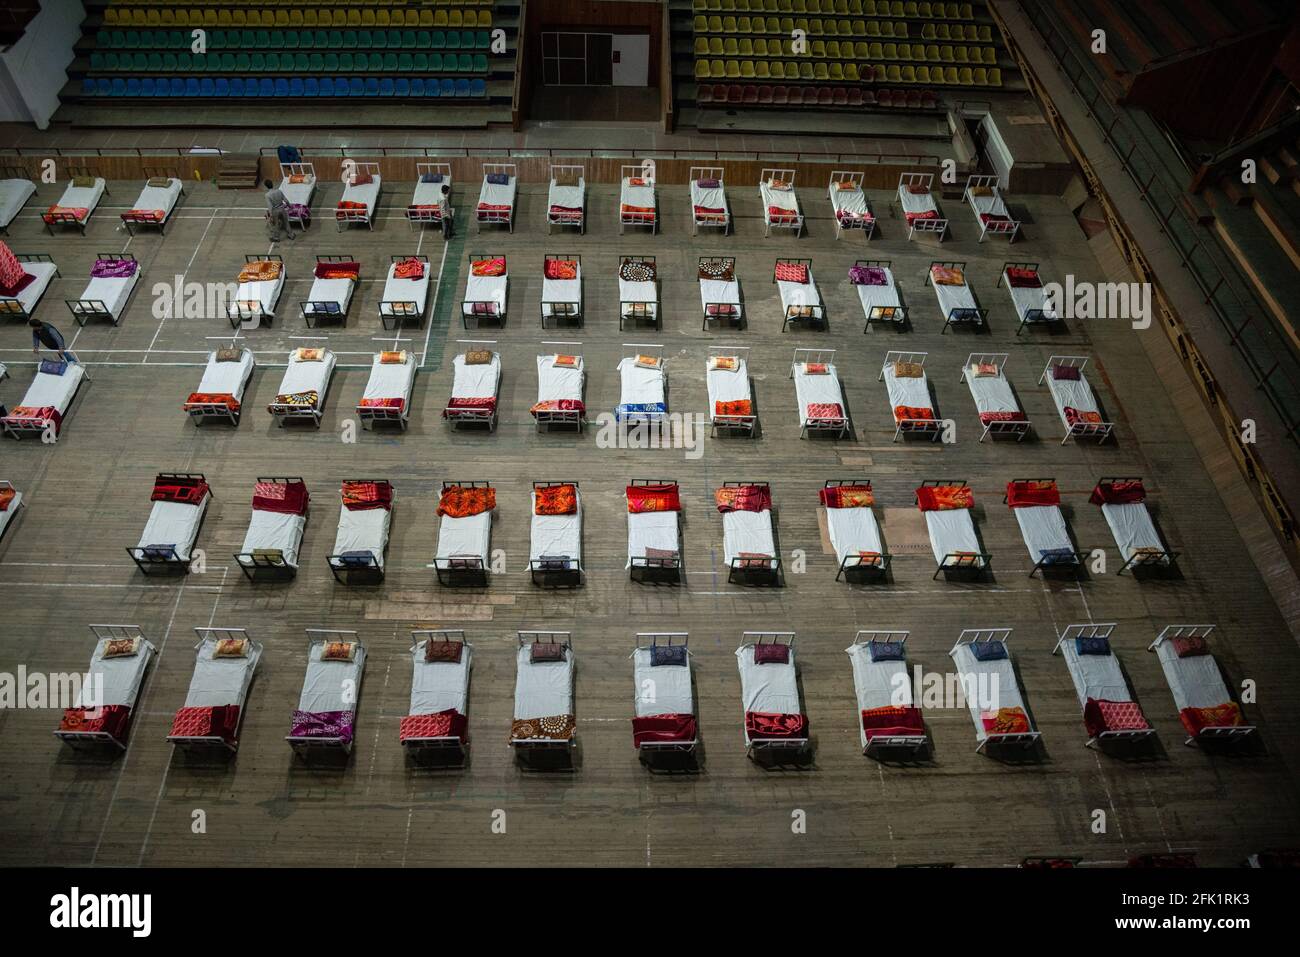 Srinagar, India. 27th Apr, 2021. Rows of beds are placed inside an indoor sports stadium turned COVID-19 isolation center in Srinagar. The Jammu and Kashmir reported 3,164 positive cases, highest ever since the outbreak of Covid-19 pandemic last year, pushing the number of active cases to 22,283 which otherwise were less than 600 around a month before. A 20 year old woman was reported among the Twenty five deaths in J&K in the last 24 hours taking the death toll to 2,197. (Photo by Idrees Abbas/SOPA Images/Sipa USA) Credit: Sipa USA/Alamy Live News Stock Photo